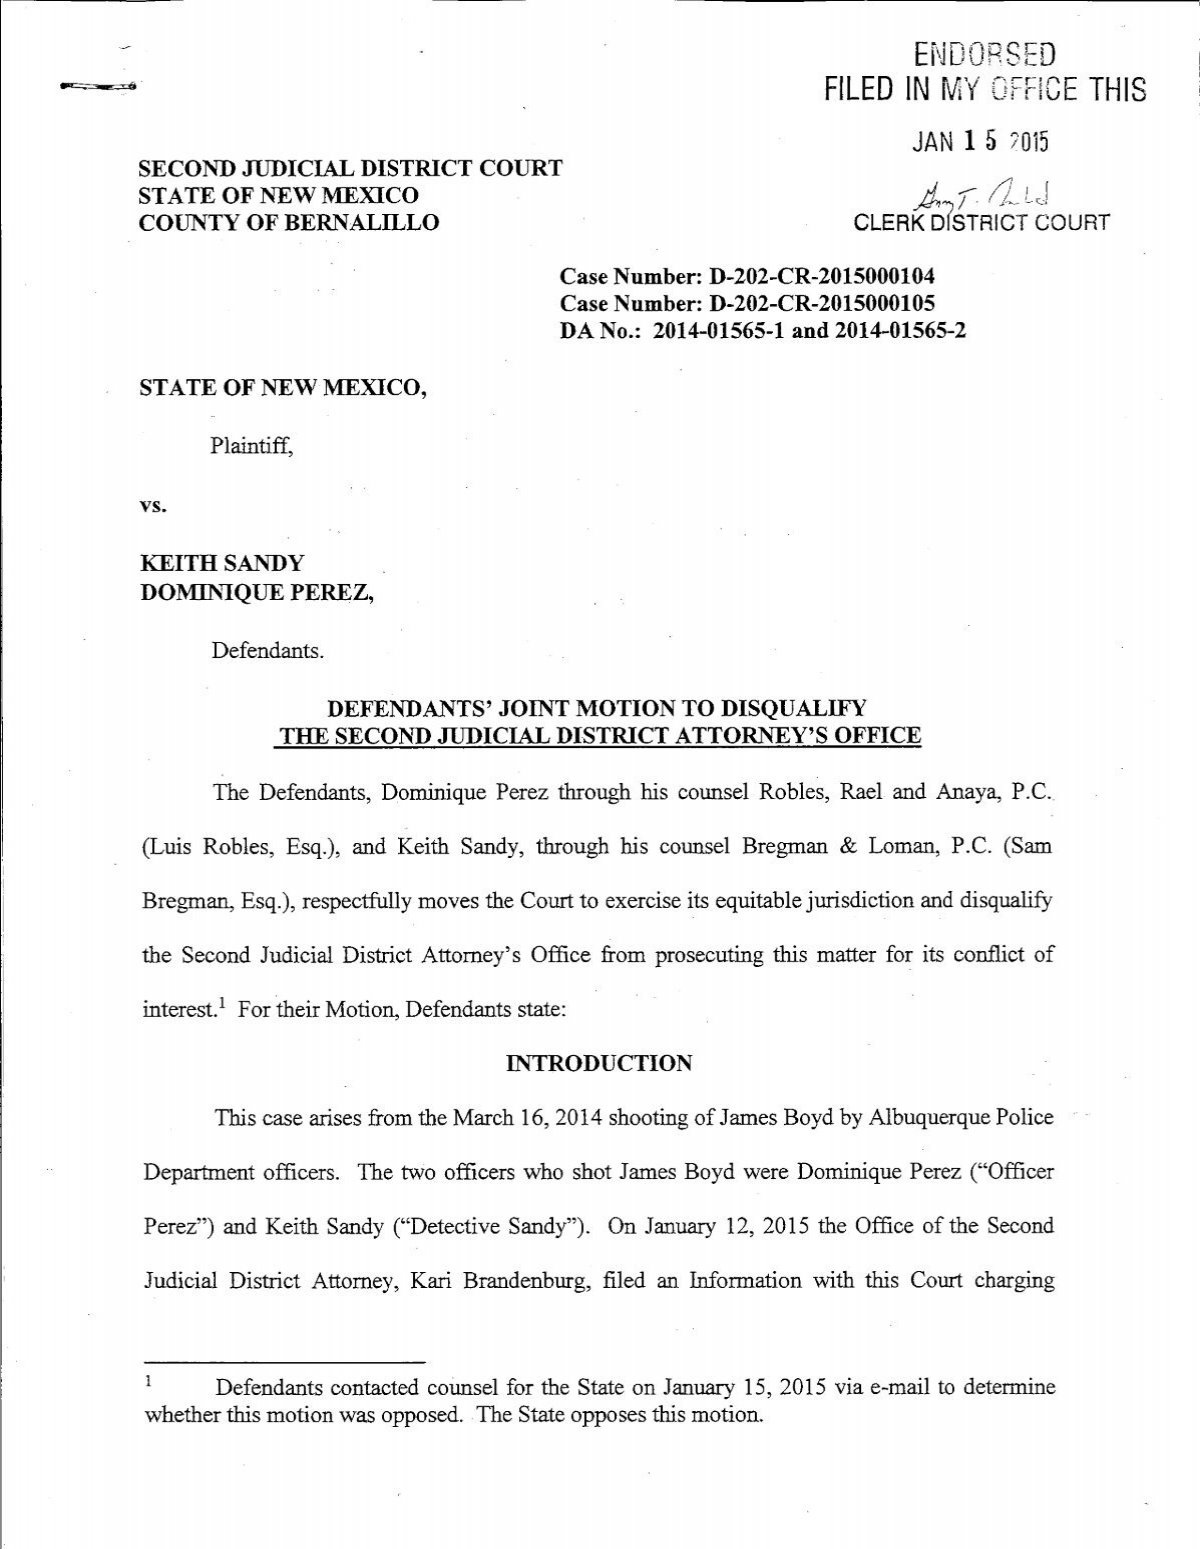 04-defendants-joint-motion-to-disqualify-the-second-judicial-district- attorneys-office-01-15-15